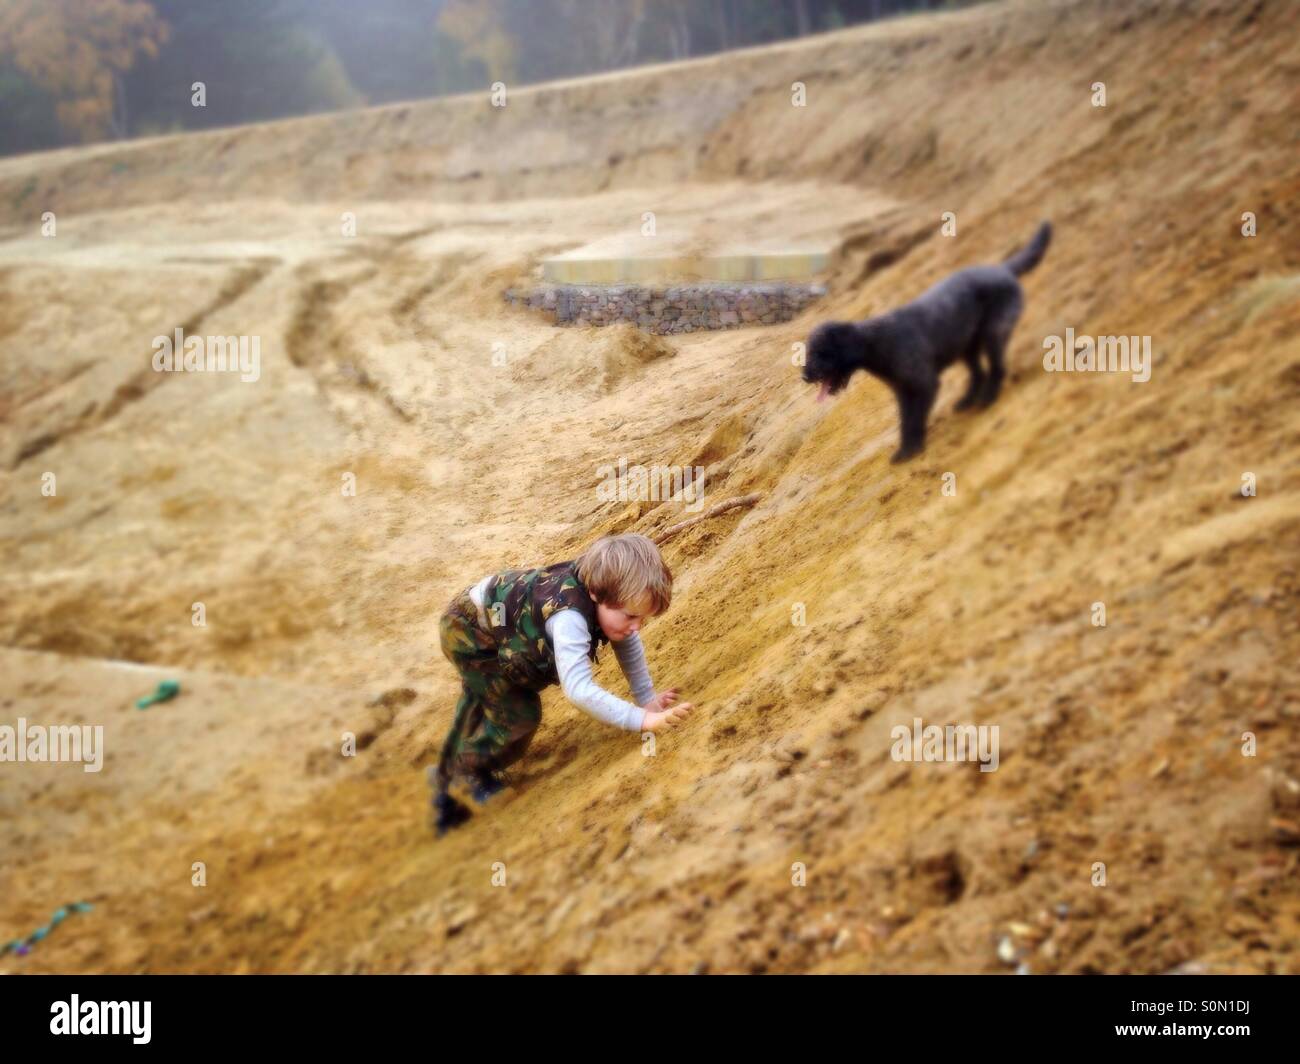 A dog looks down at a young boy as he attempts to scramble up a sand bank in Yateley in England. Stock Photo